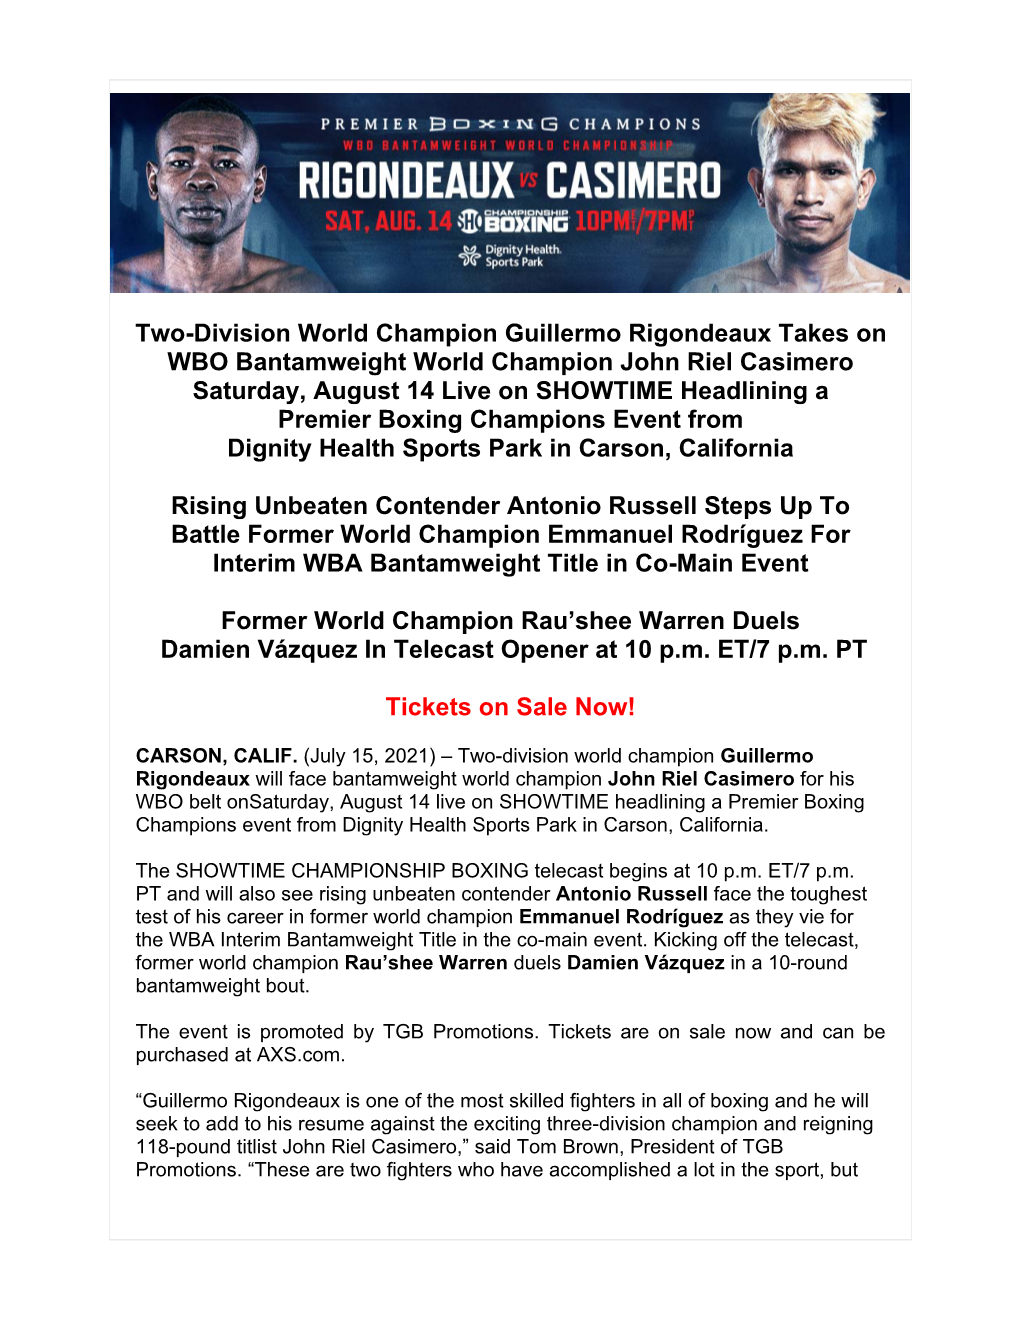 Two-Division World Champion Guillermo Rigondeaux Takes On